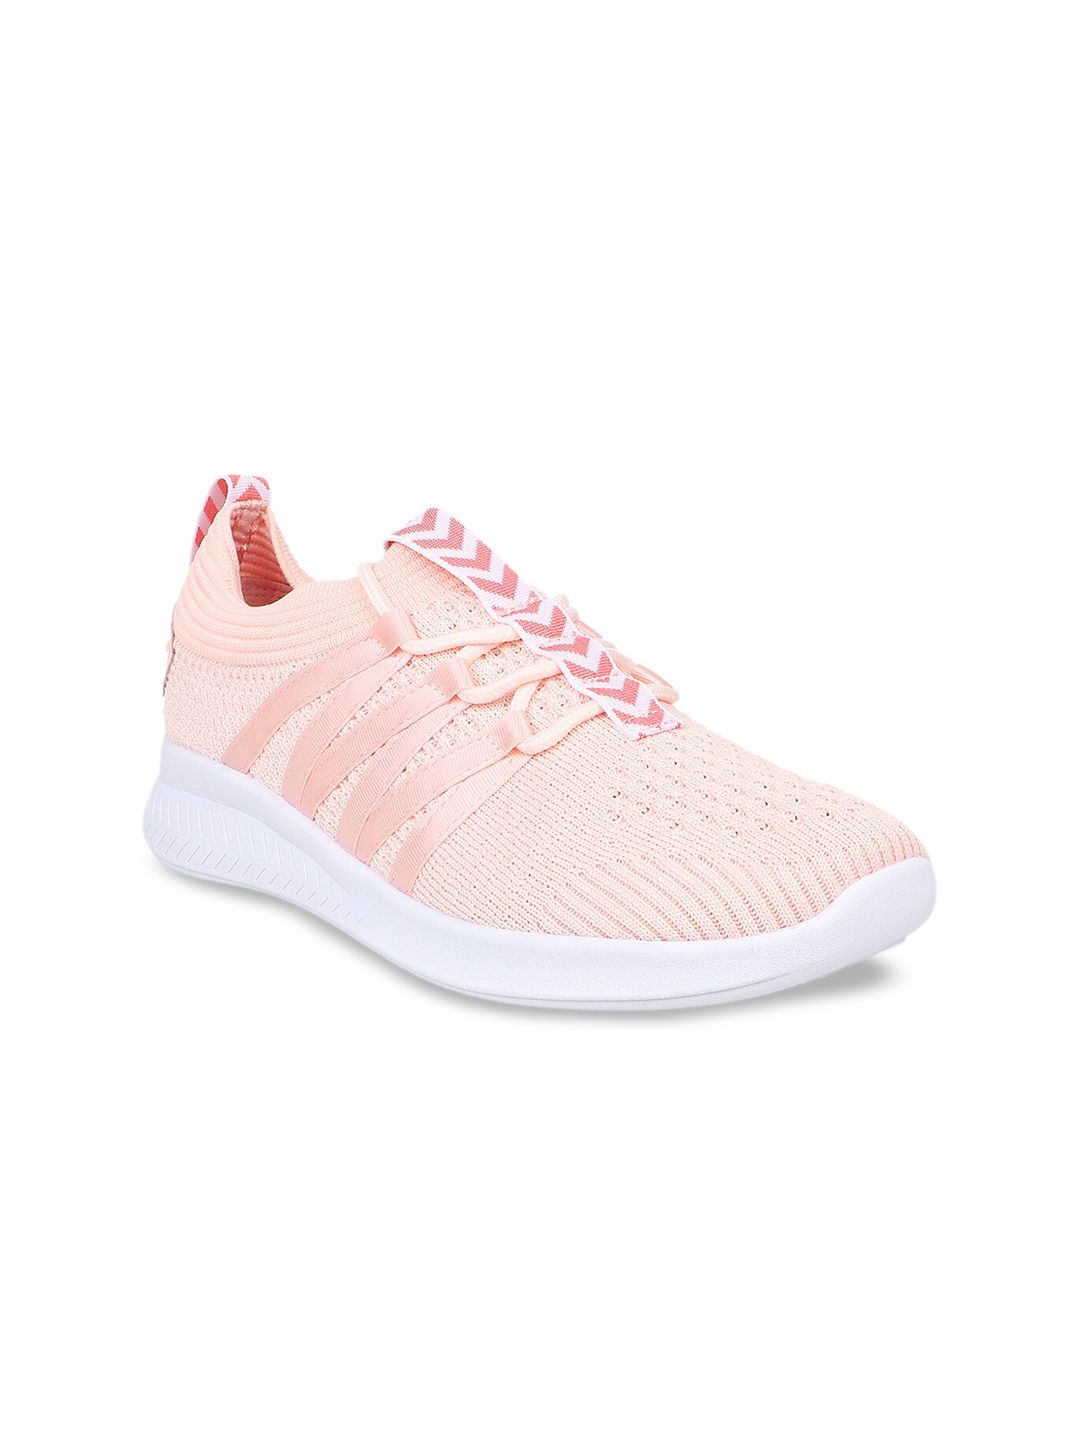 hummel Unisex Pink Synthetic Training or Gym Shoes Price in India